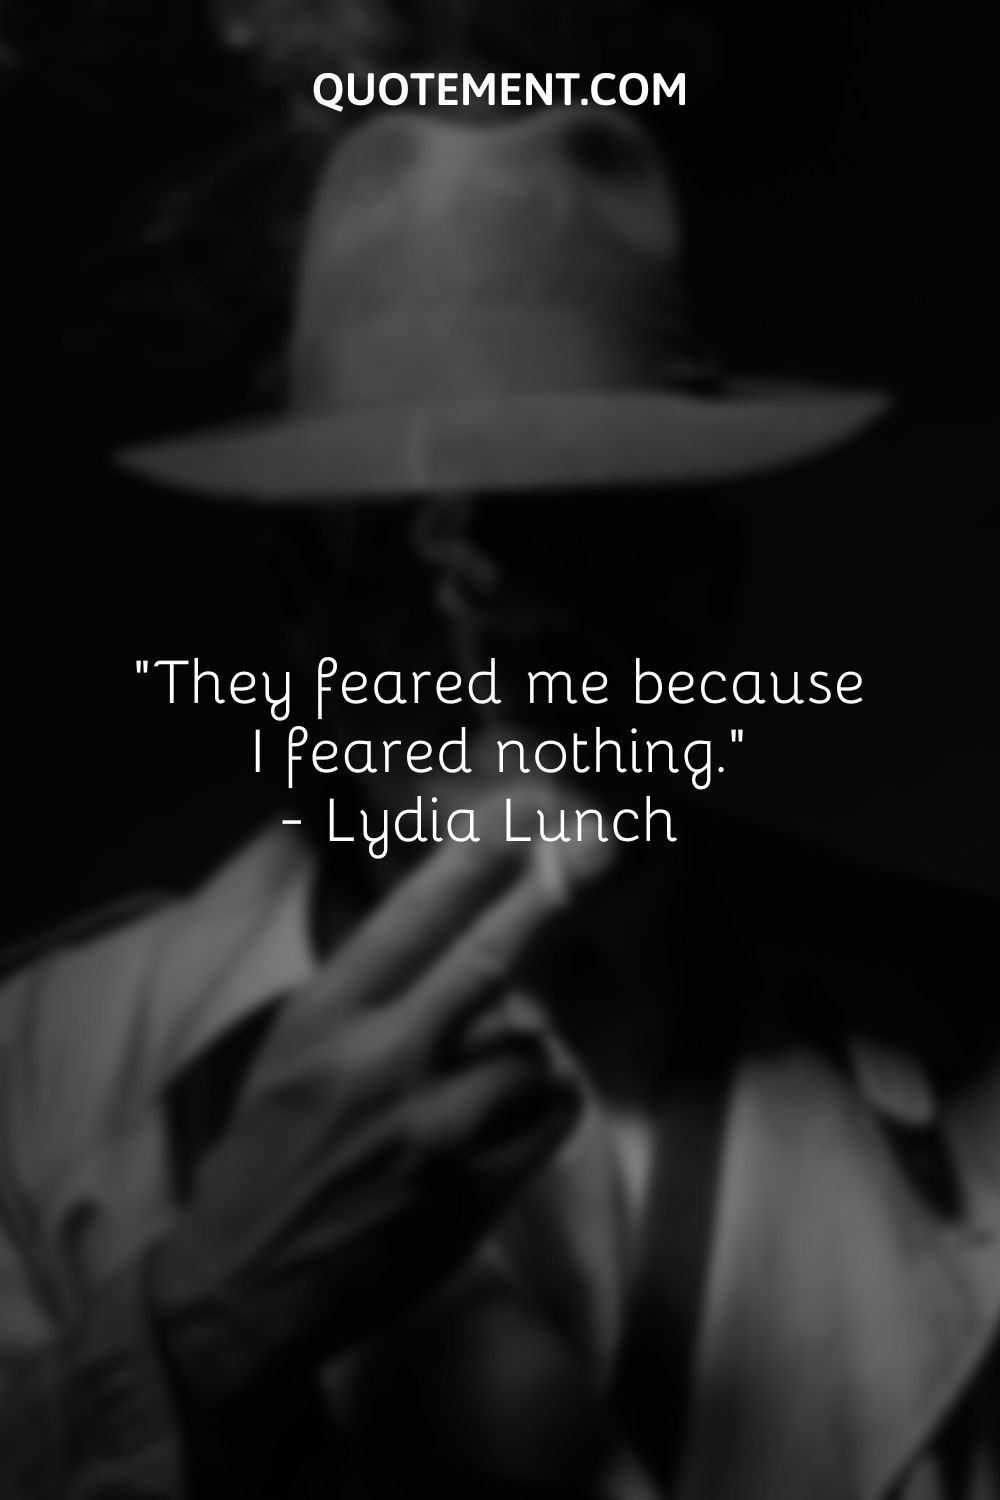 They feared me because I feared nothing